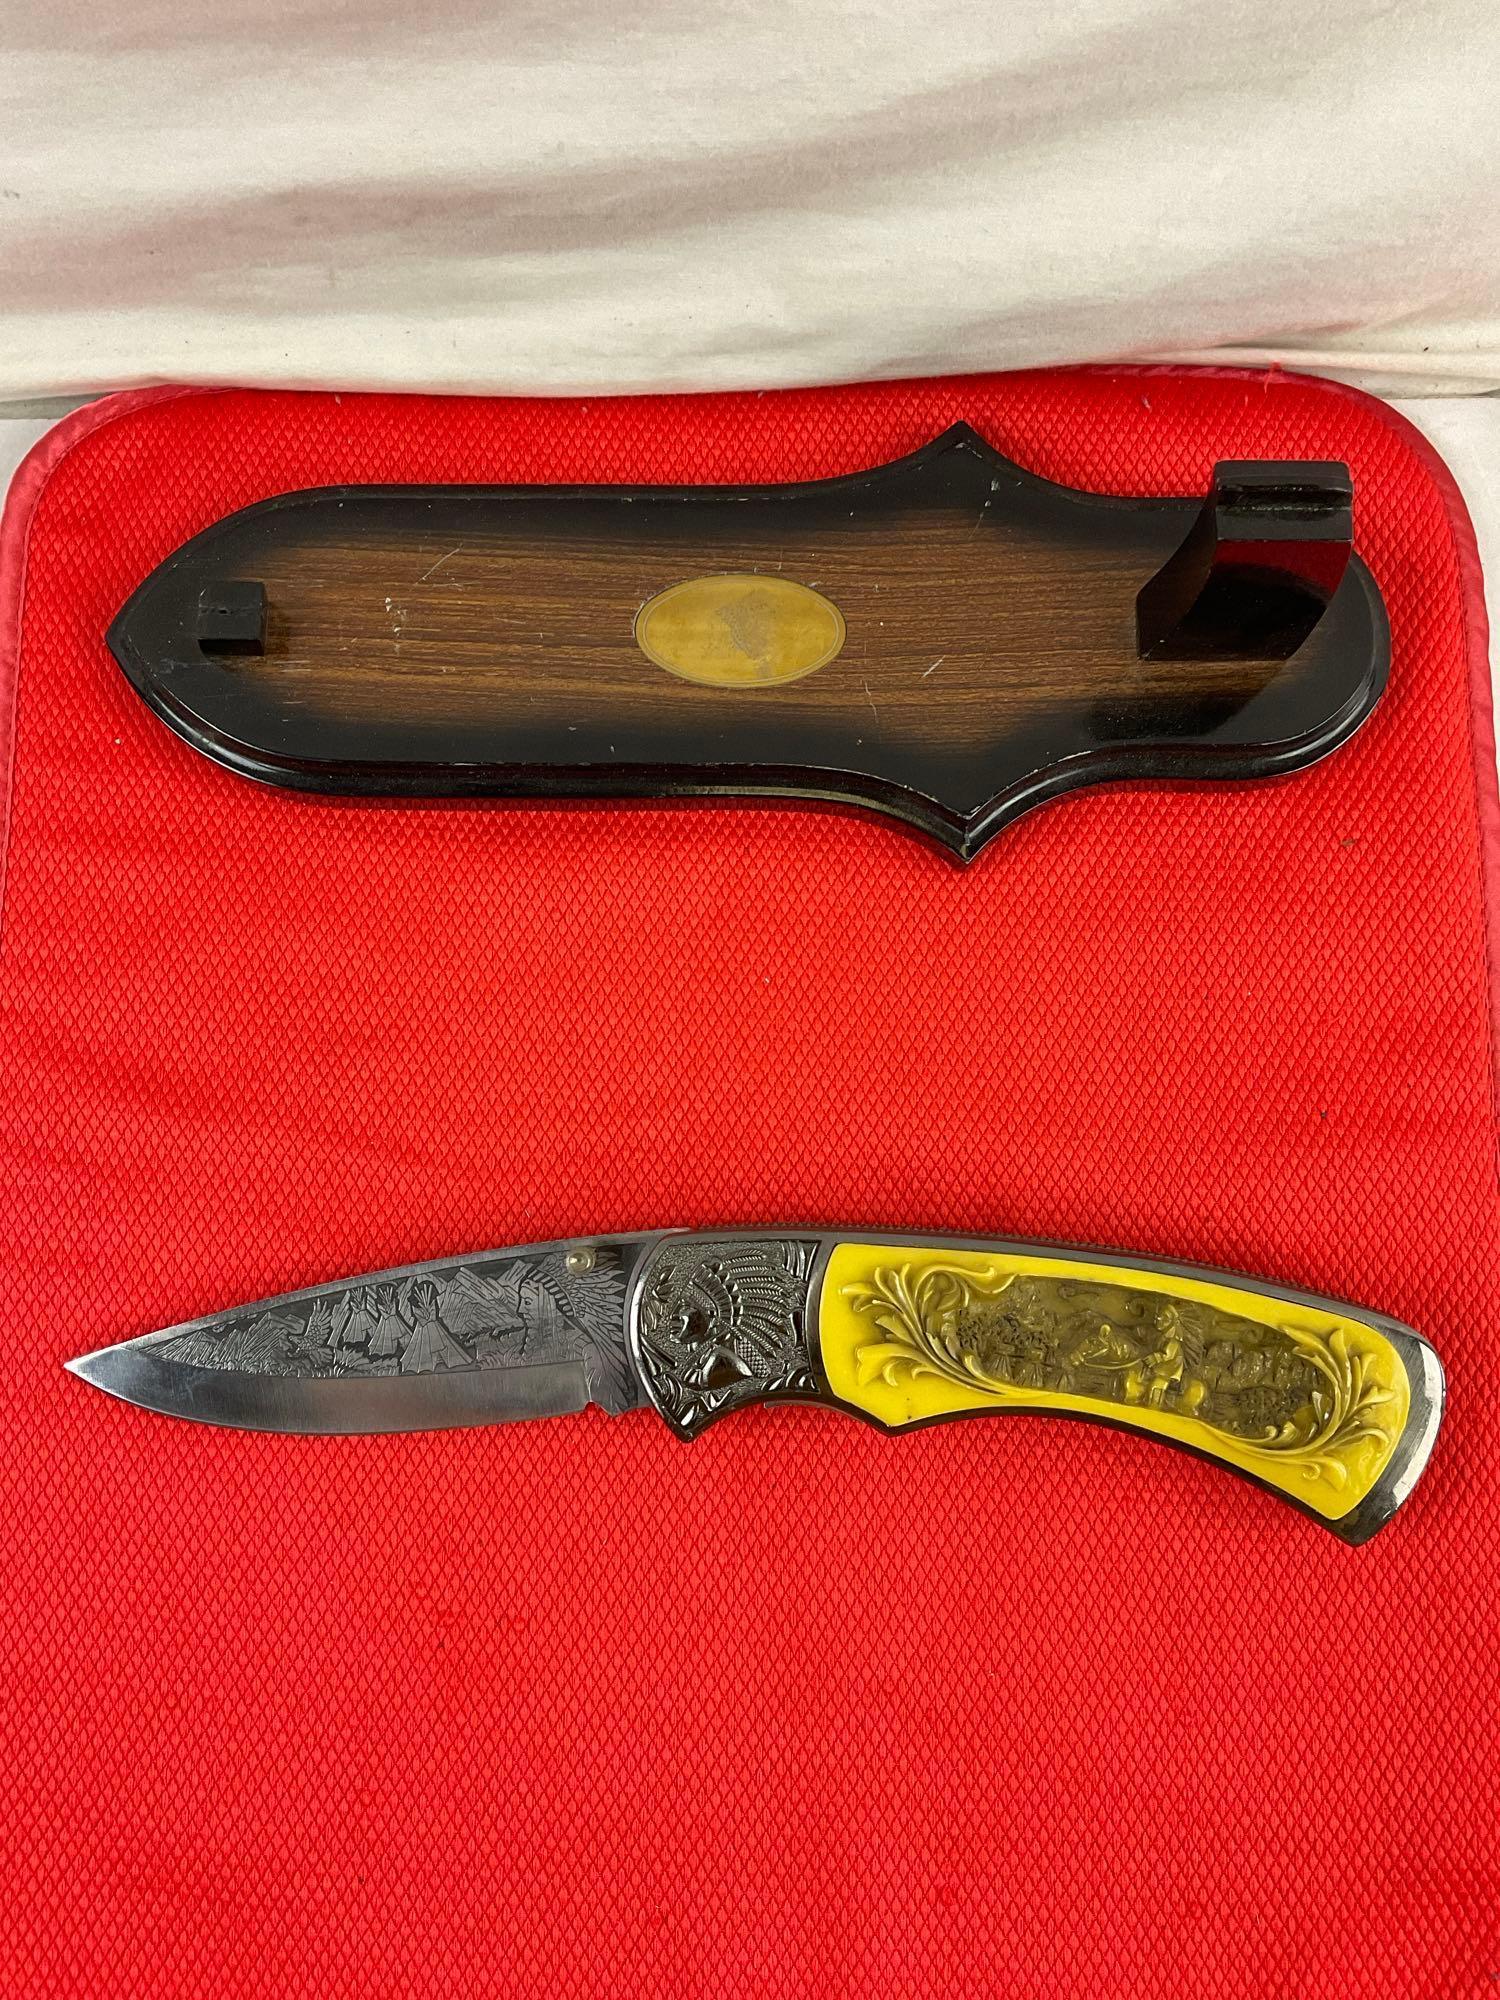 3 pcs Weapon Collection Assortment. 6" Folding Steel Knife w/ Carved Resin Handle & Wood Mount. See